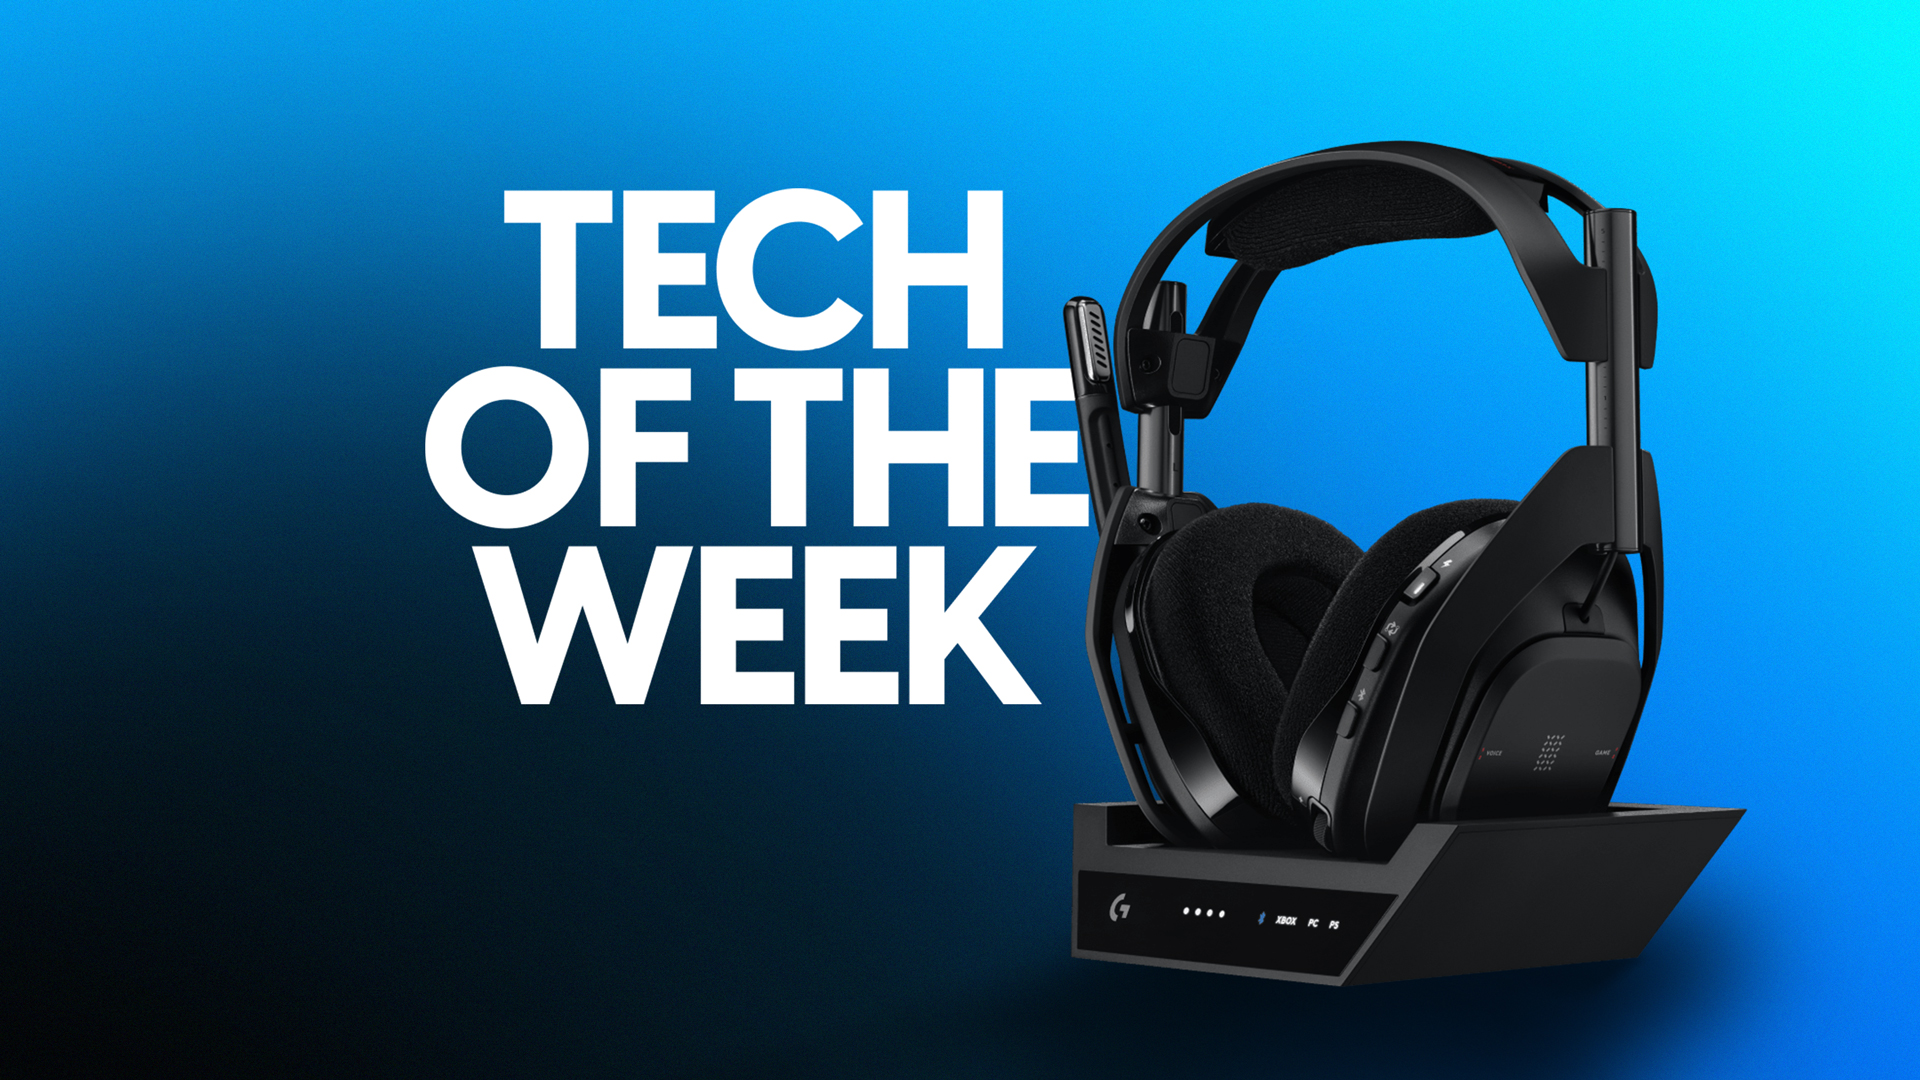 Logitech made the ultimate gaming headset, but it's complicated